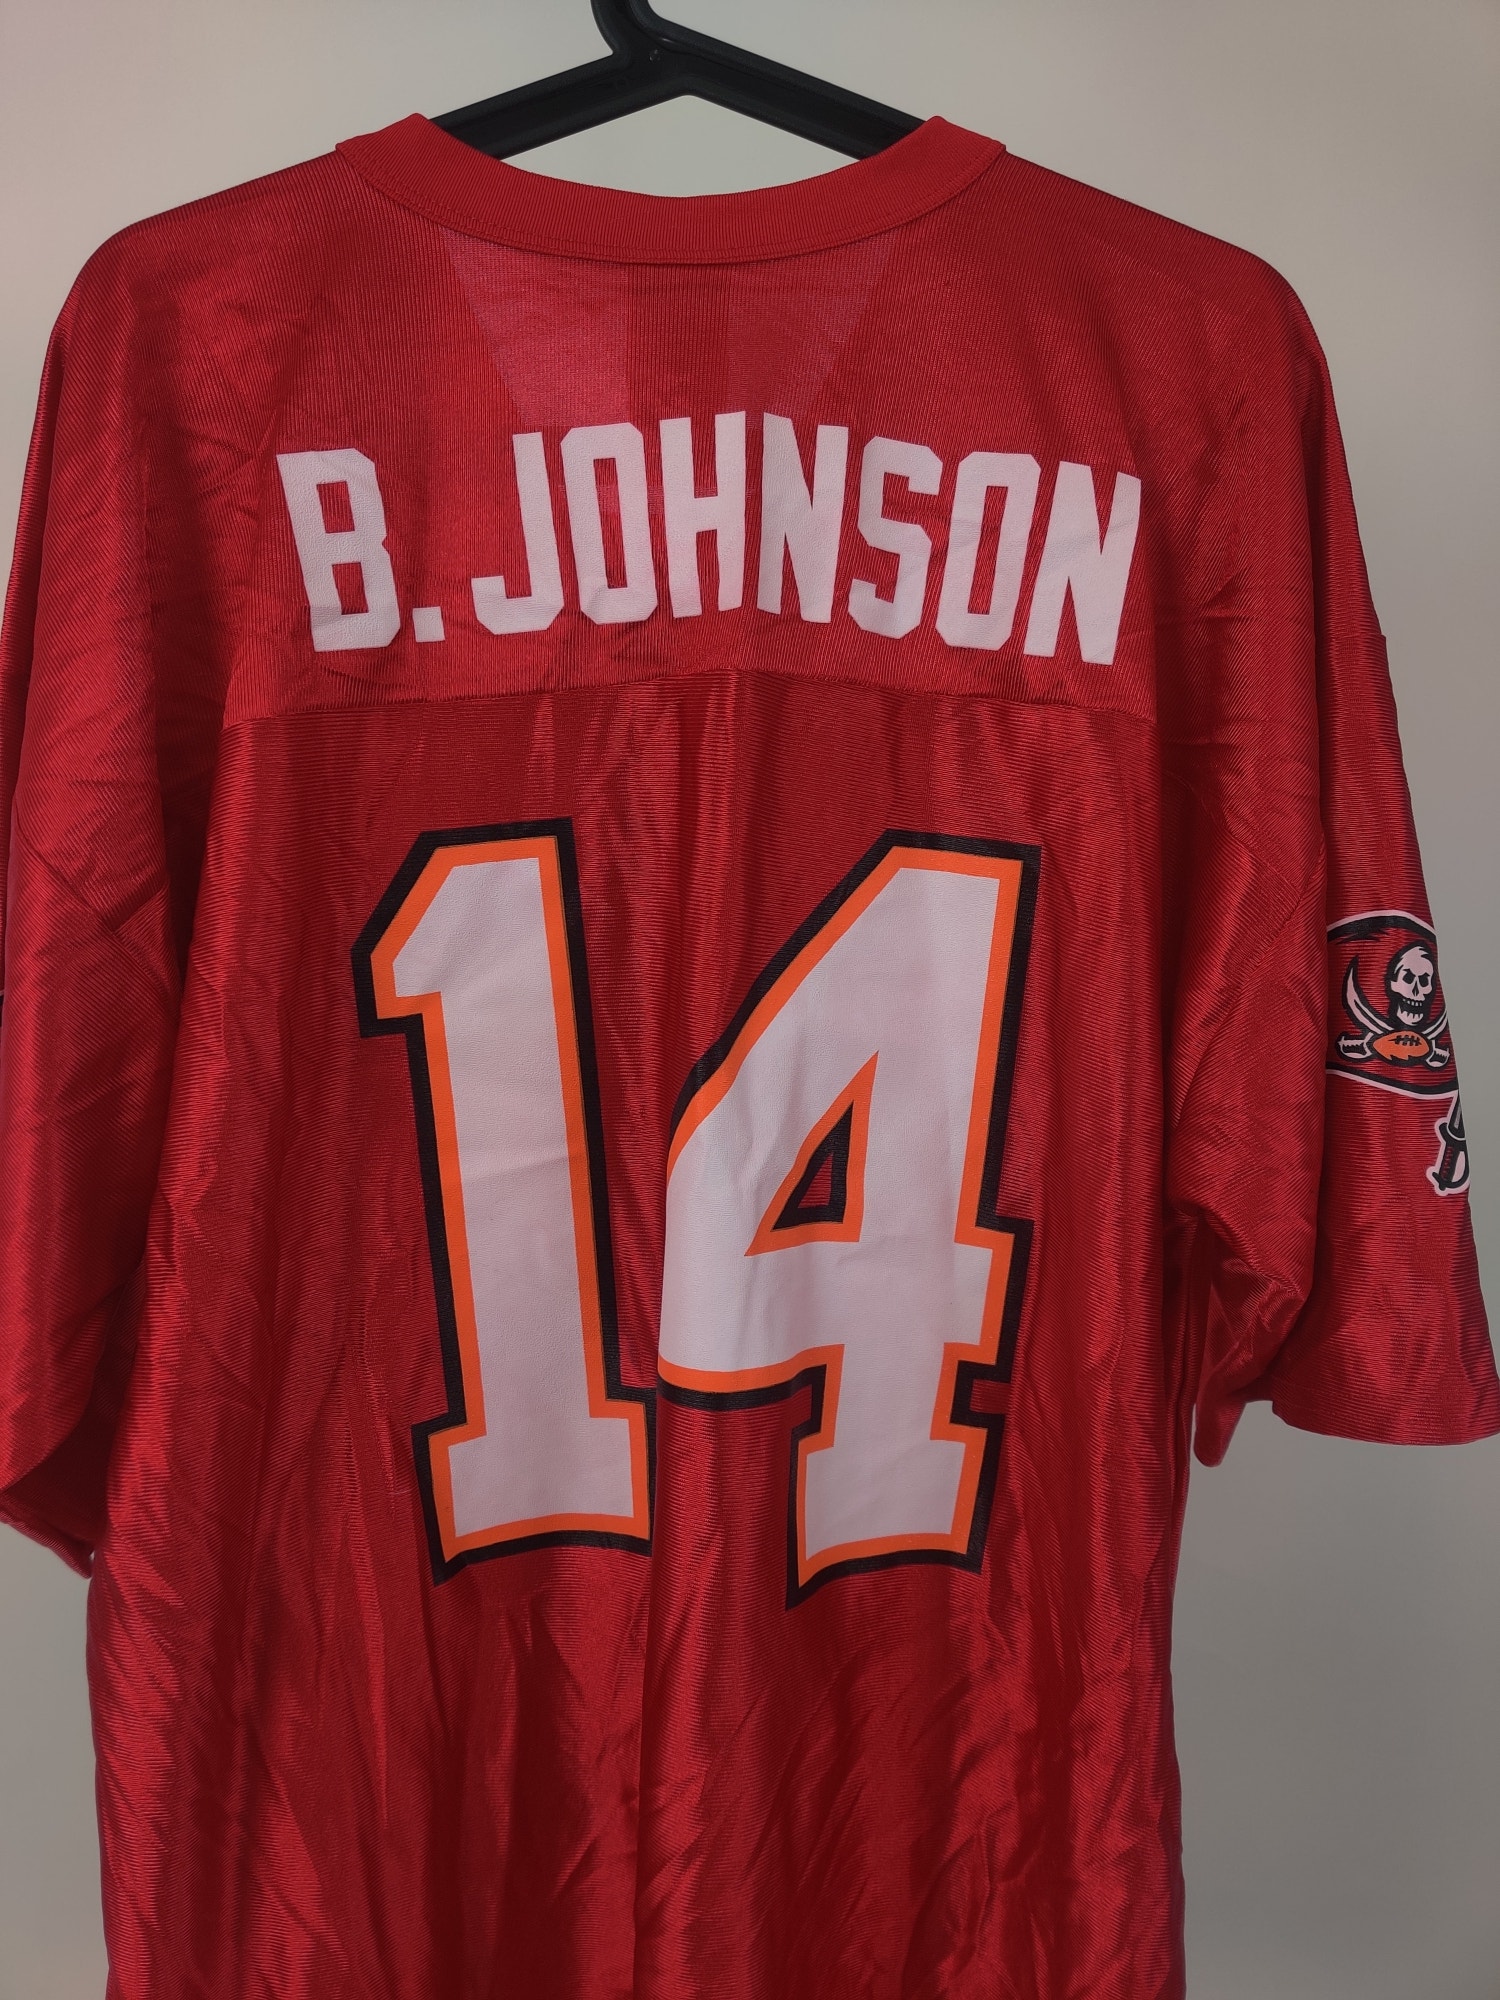 (V)NEW Tampa Bay Buccaneers B. Johnson #14 NFL Jersey Men’s XL - Picture 6 of 9